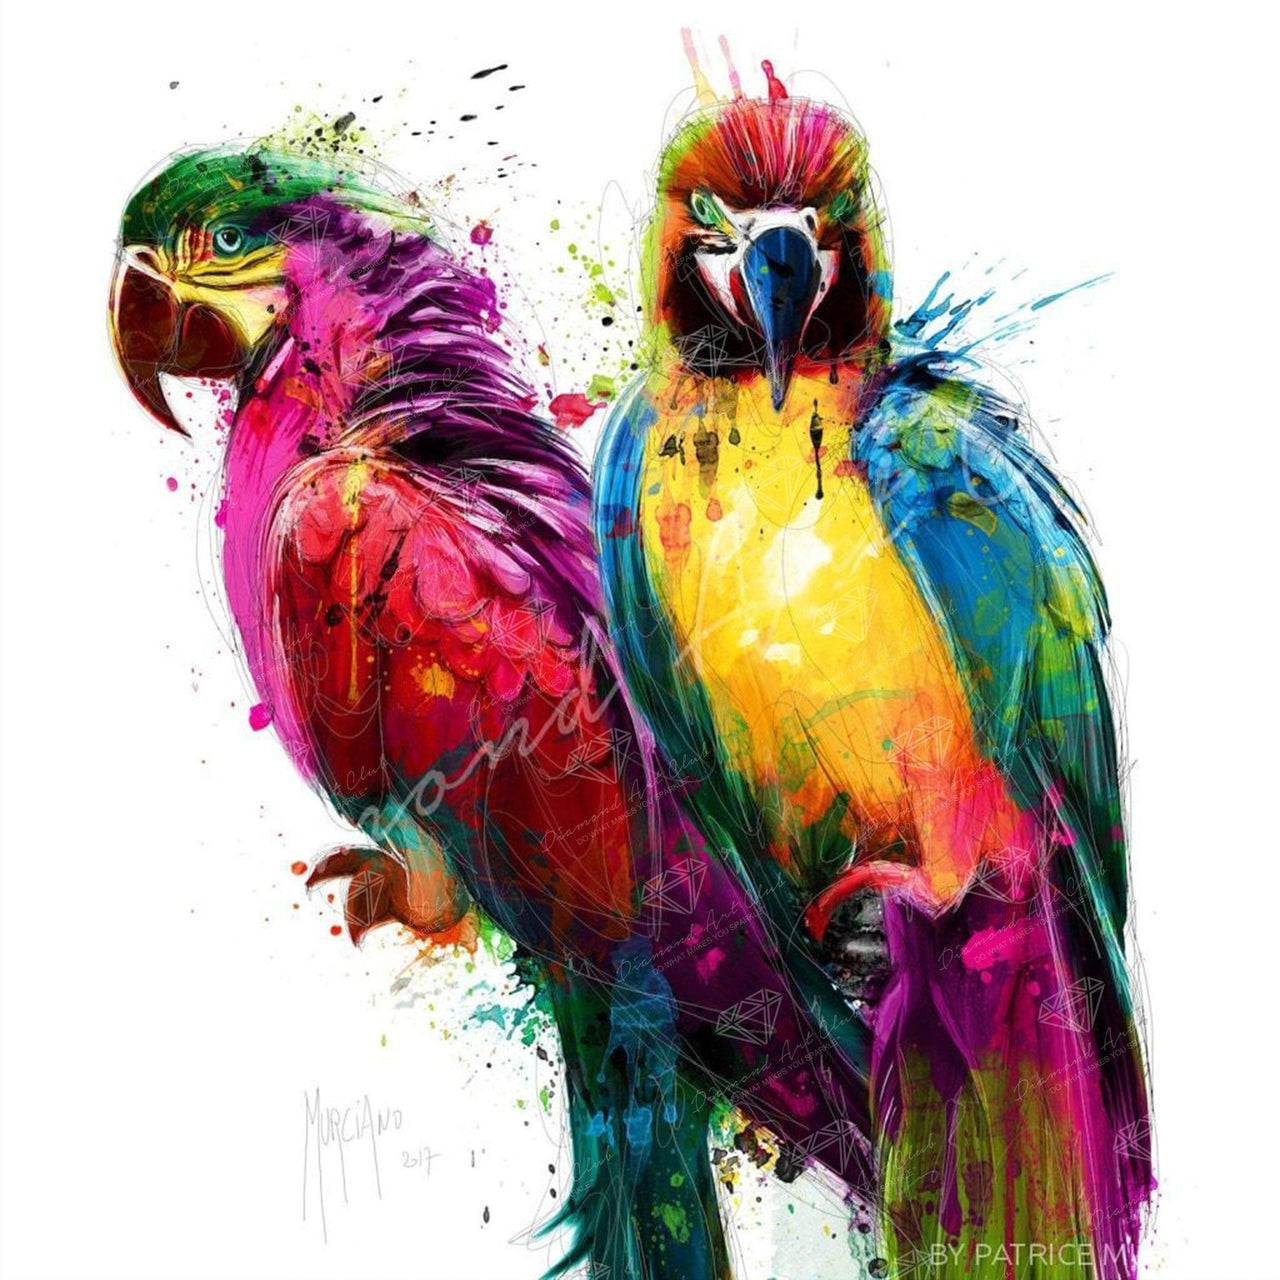 Diamond Painting Tropical Birds 12.6″ x 12.6″ (32cm x 32cm) / Square With 36 Colors including 3 ABs / 15,627